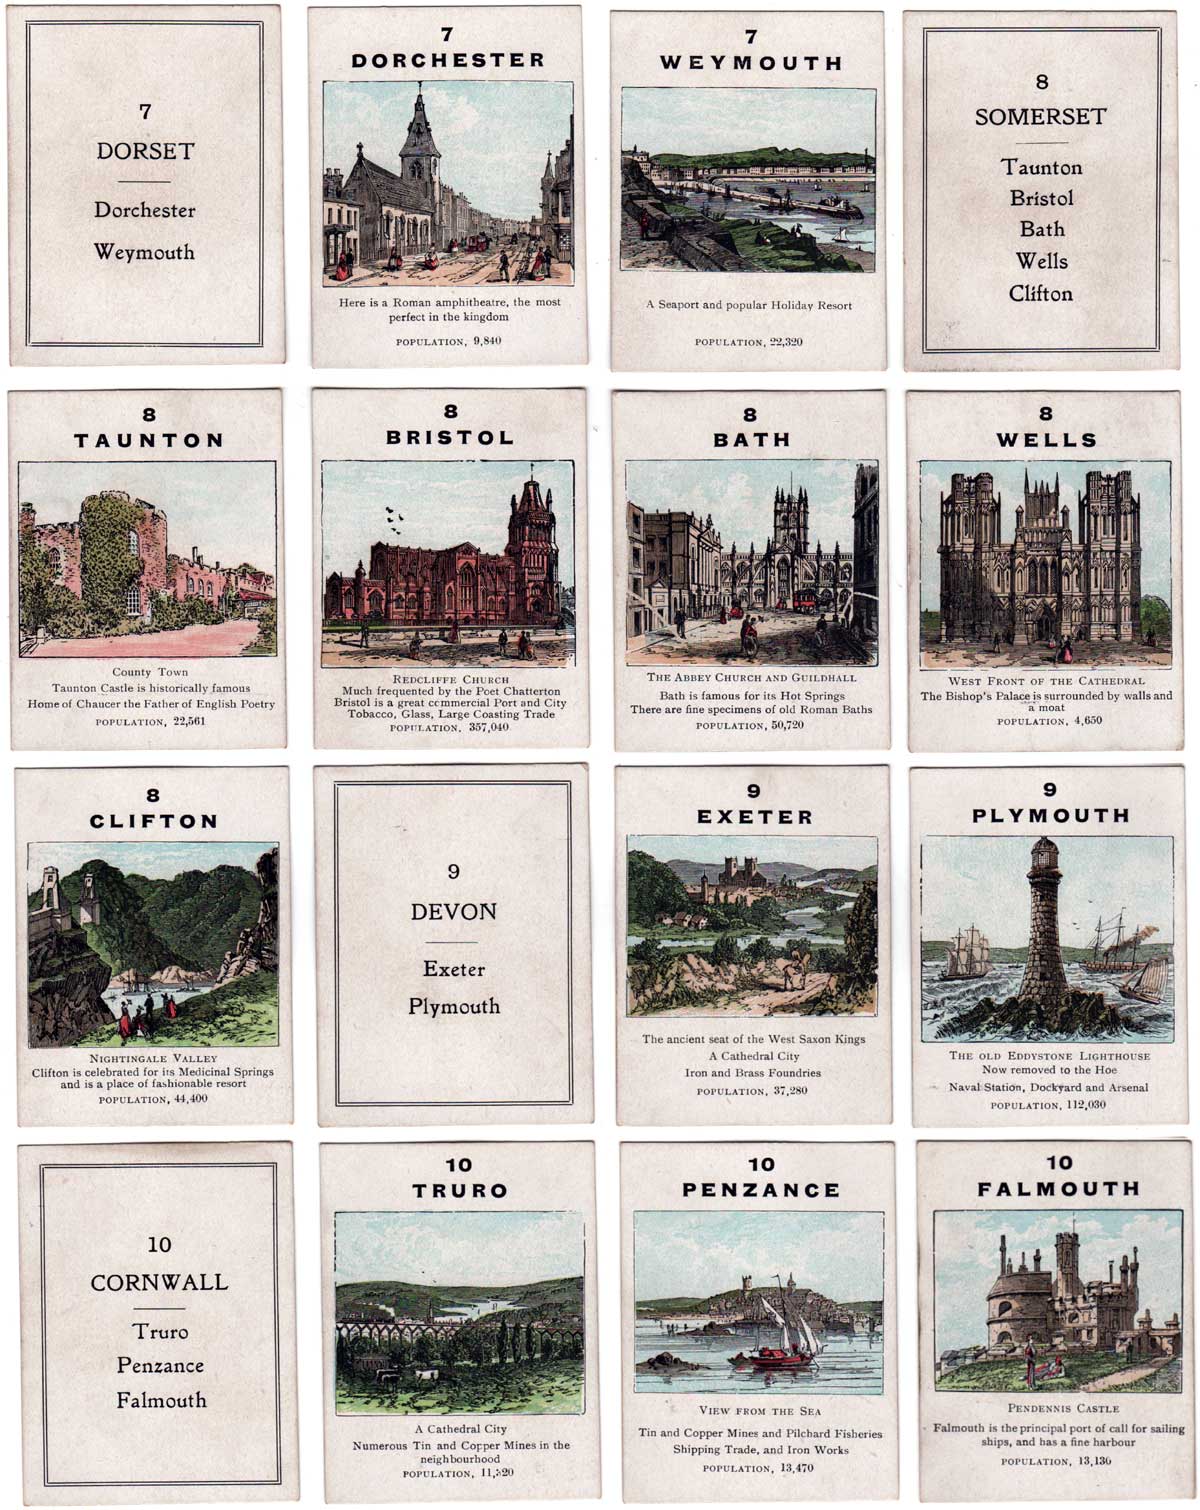 Jaques' Counties of England card game, 4th Series (Southern Counties), c.1910